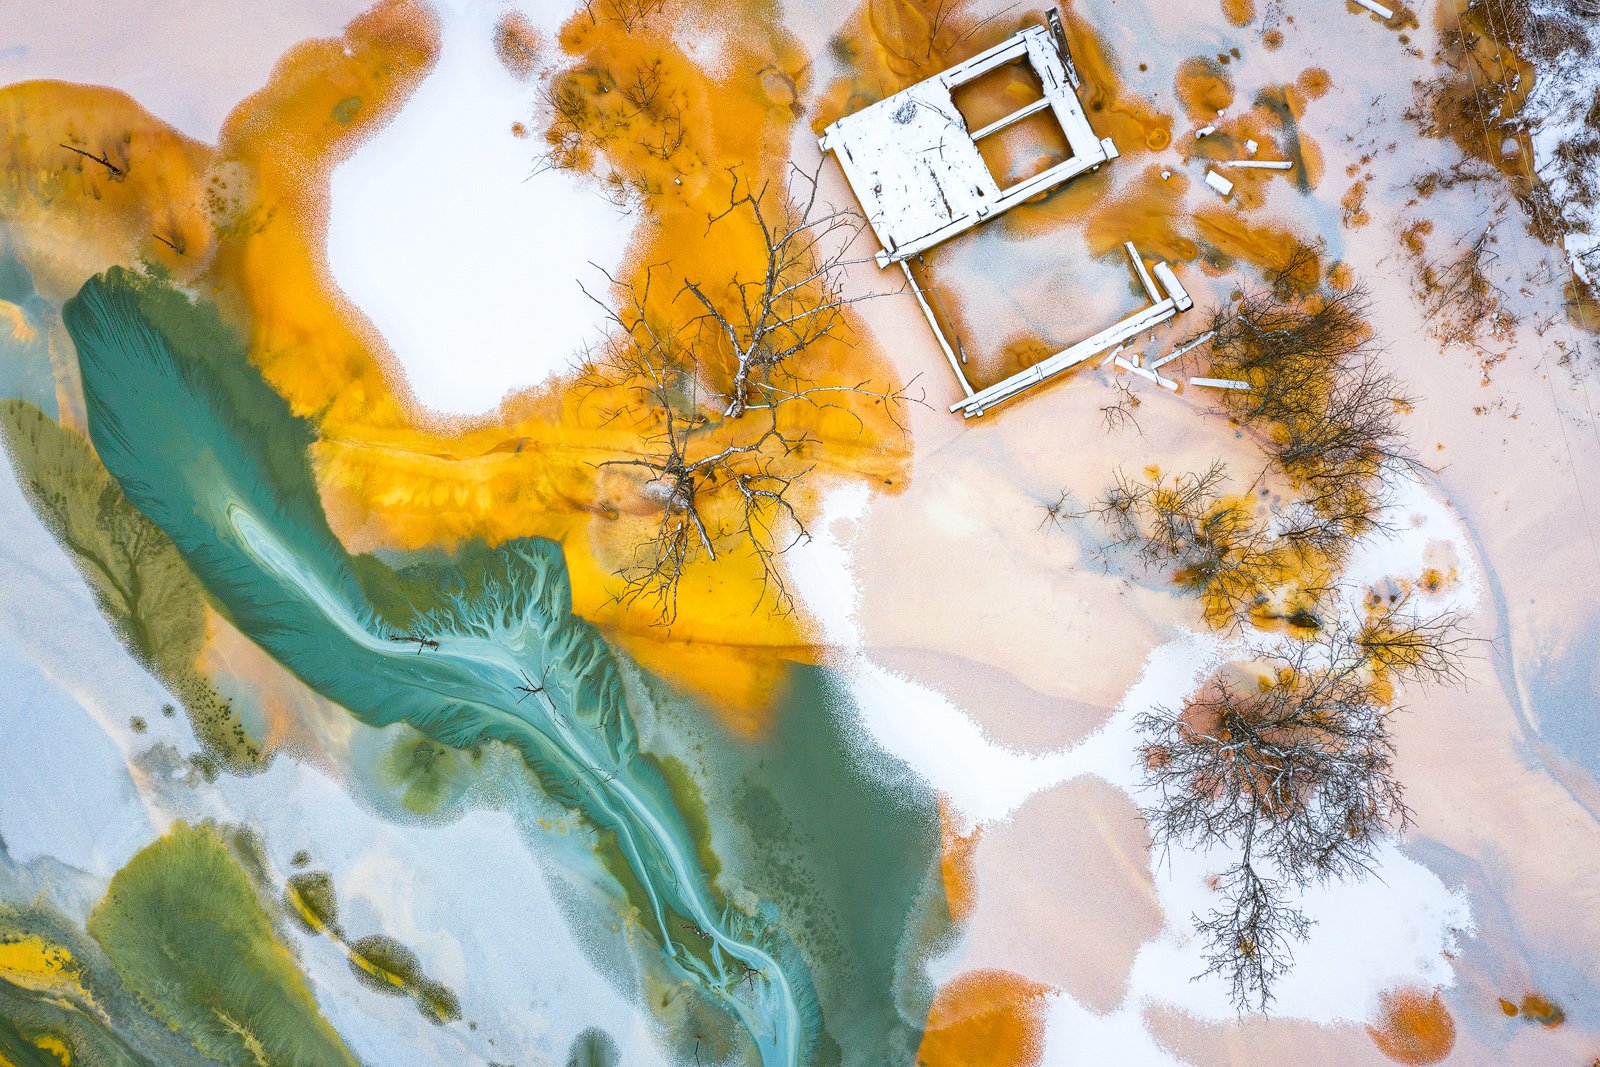 #aerial, #fineart, #abstract, #nature, #chemichal, #pollution, #romania, Gheorghe Popa